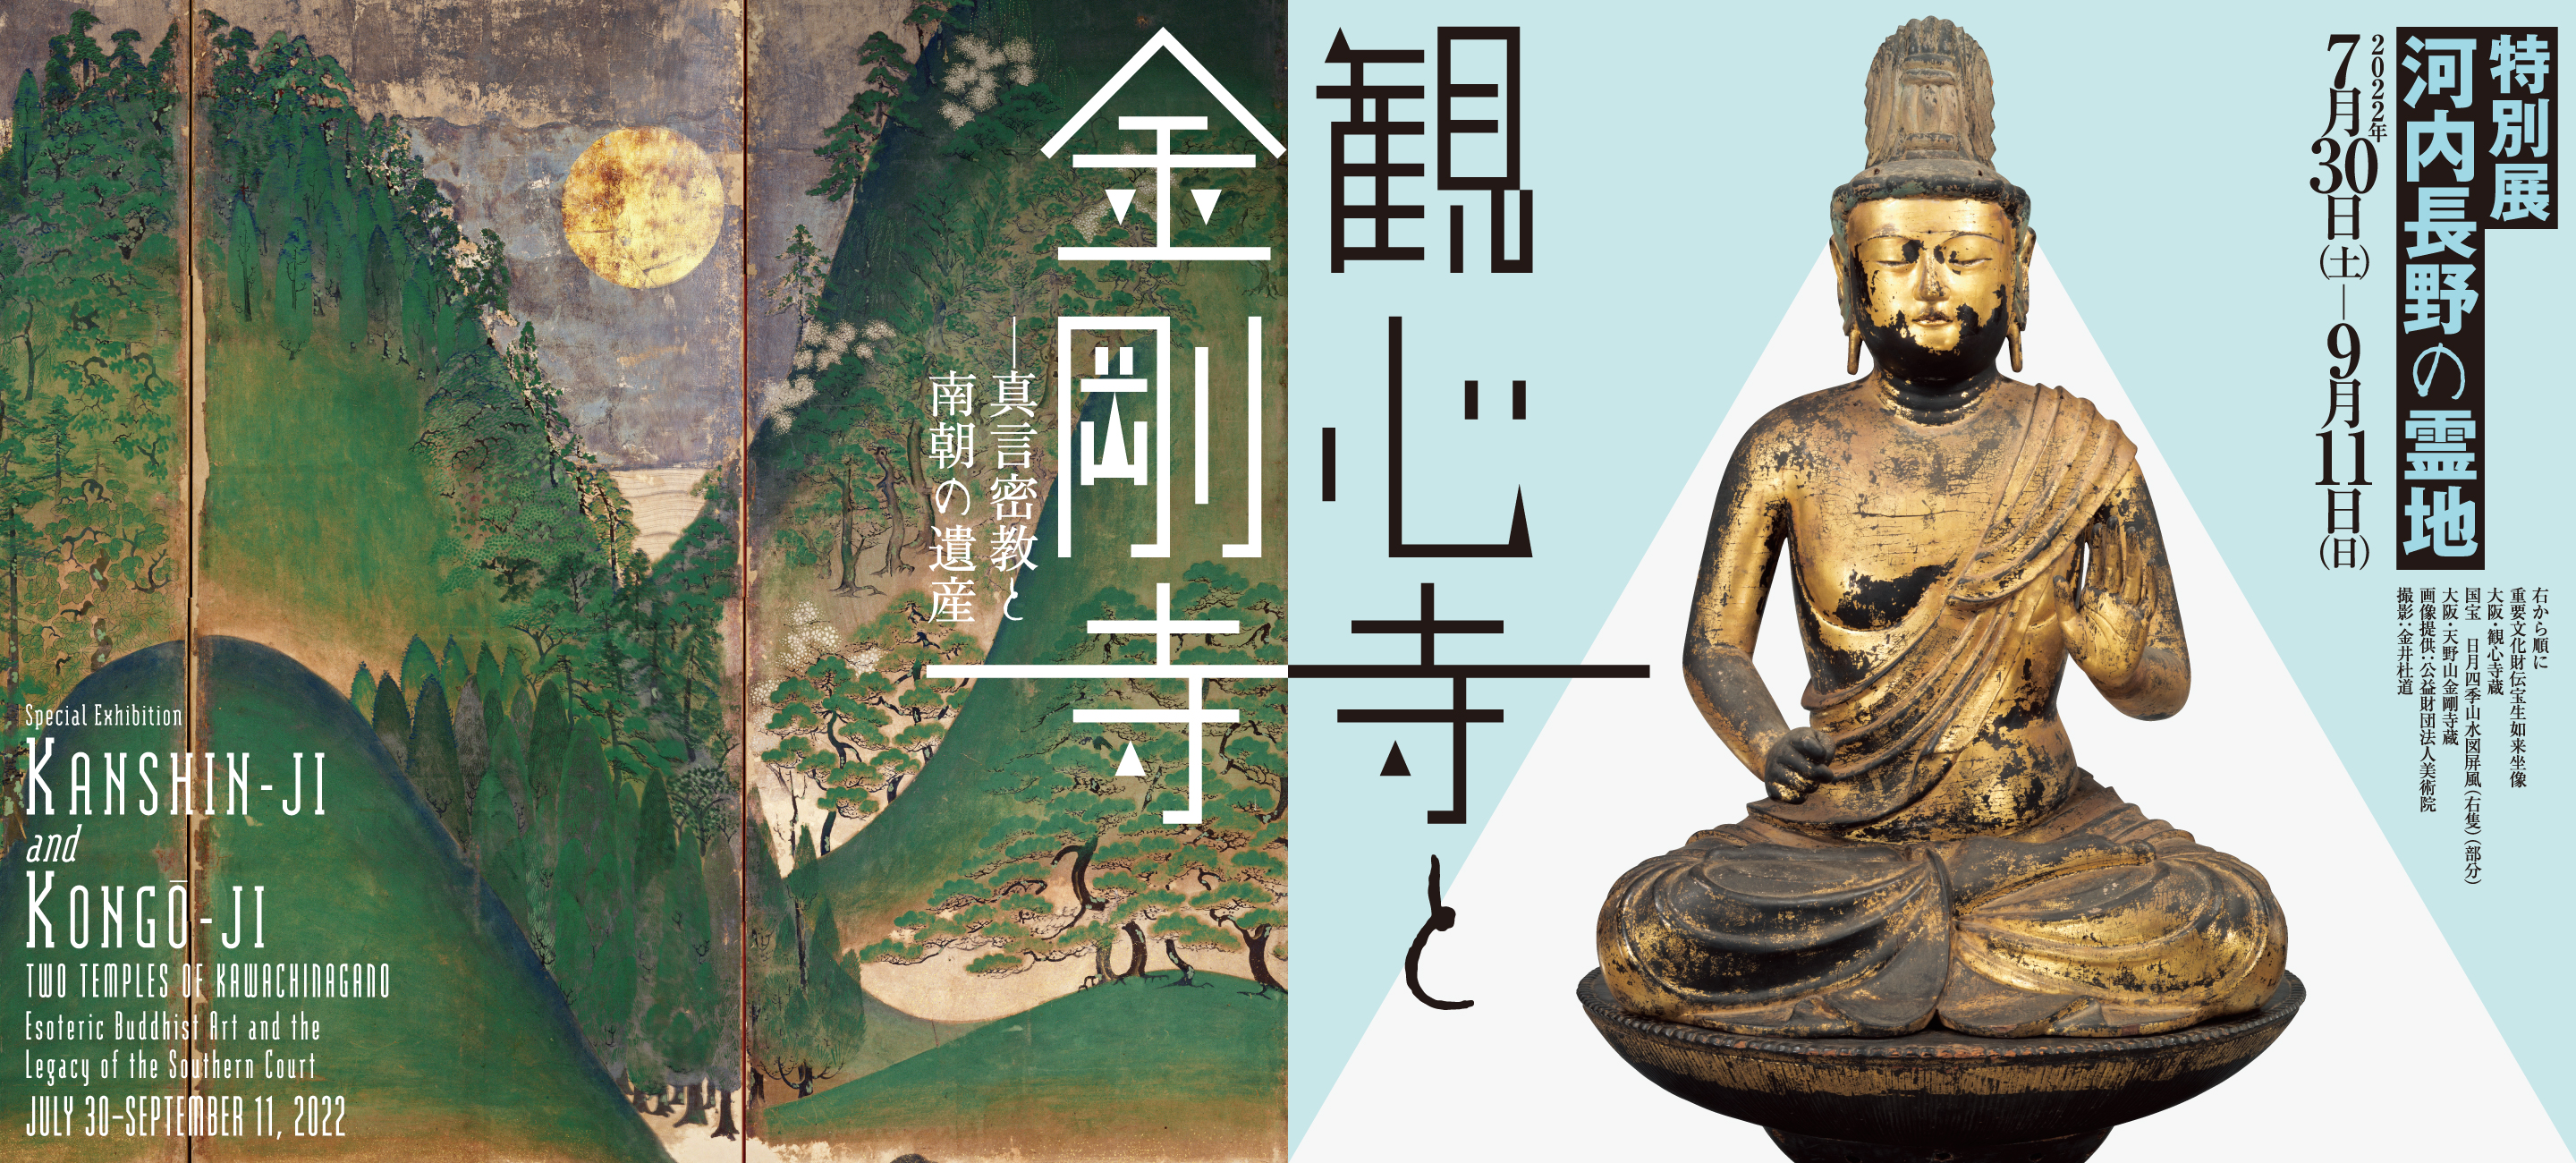 Special Exhibition <br>Kanshin-ji and Kongō-ji, Two Temples of Kawachinagano: Esoteric Buddhist Art and the Legacy of the Southern Court